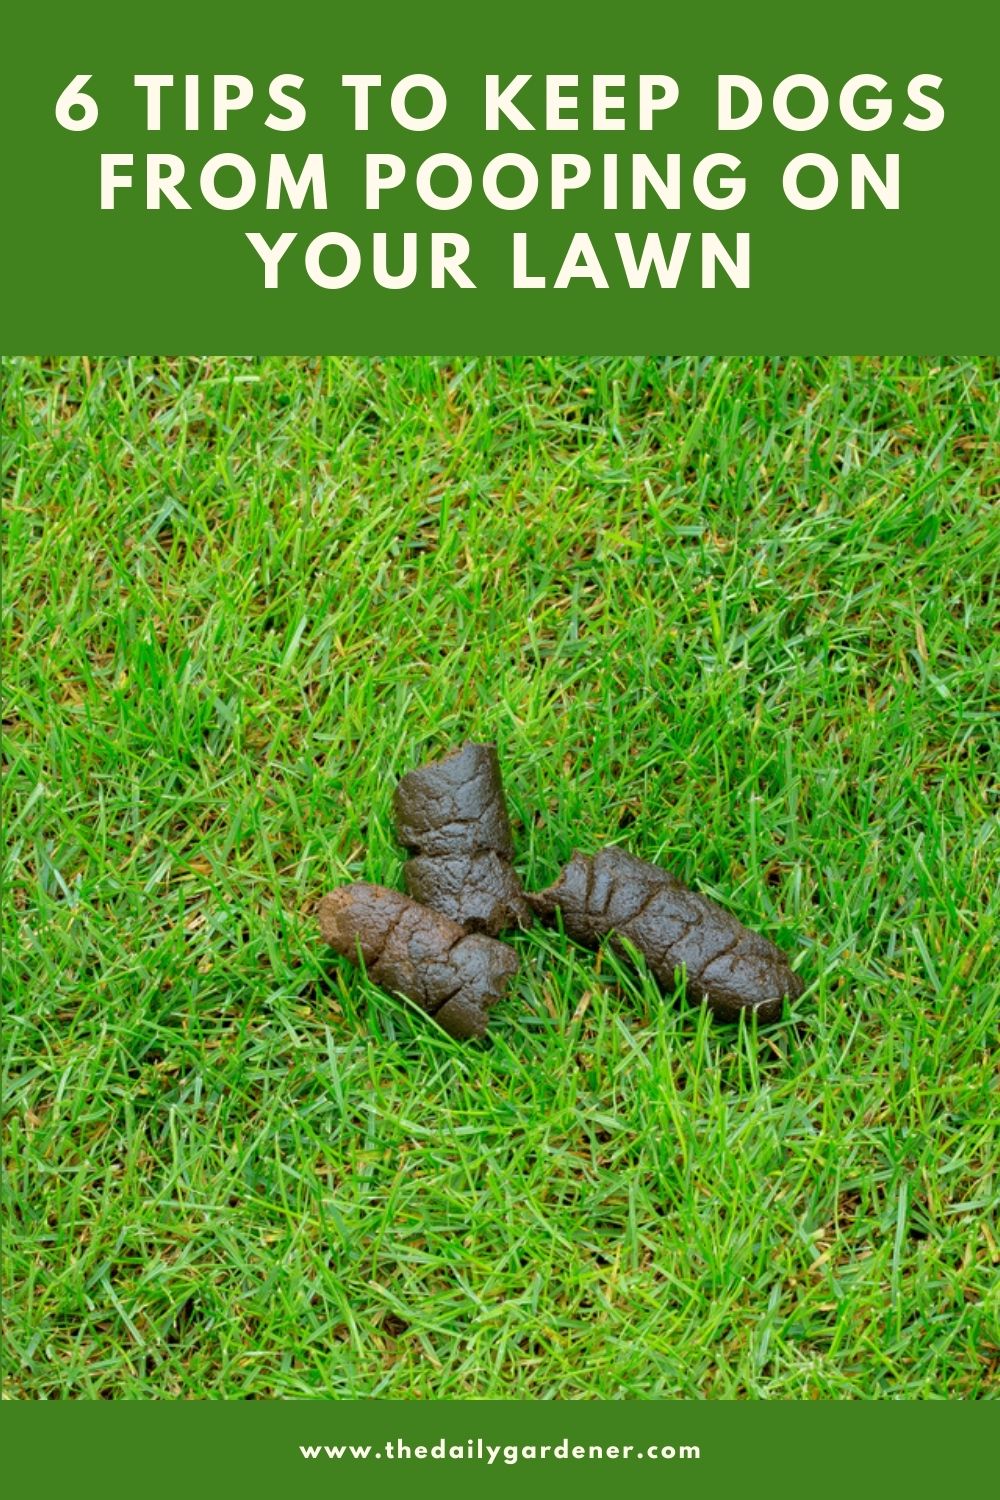 6 Tips to Keep Dogs From Rushing into Your Lawn 2